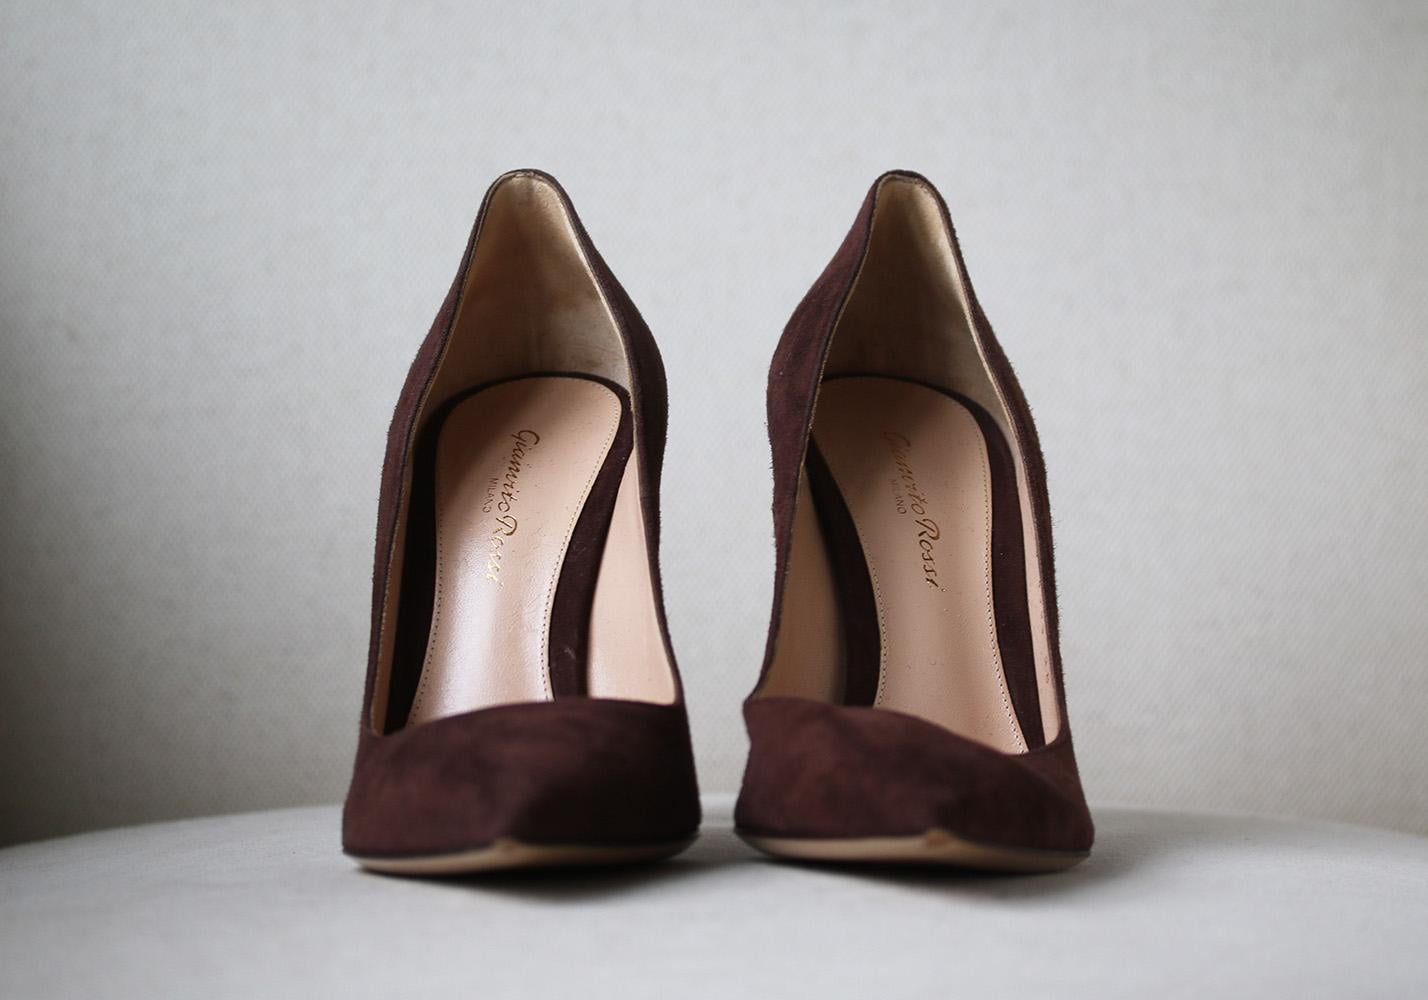 Gianvito Rossi believes that the simpler a shoe is, the better. These pumps have been handcrafted in Italy from textured brown suede with a sleek pointed toe and slim stiletto heel. Heel measures approximately 105mm/ 4 inches. Brown suede